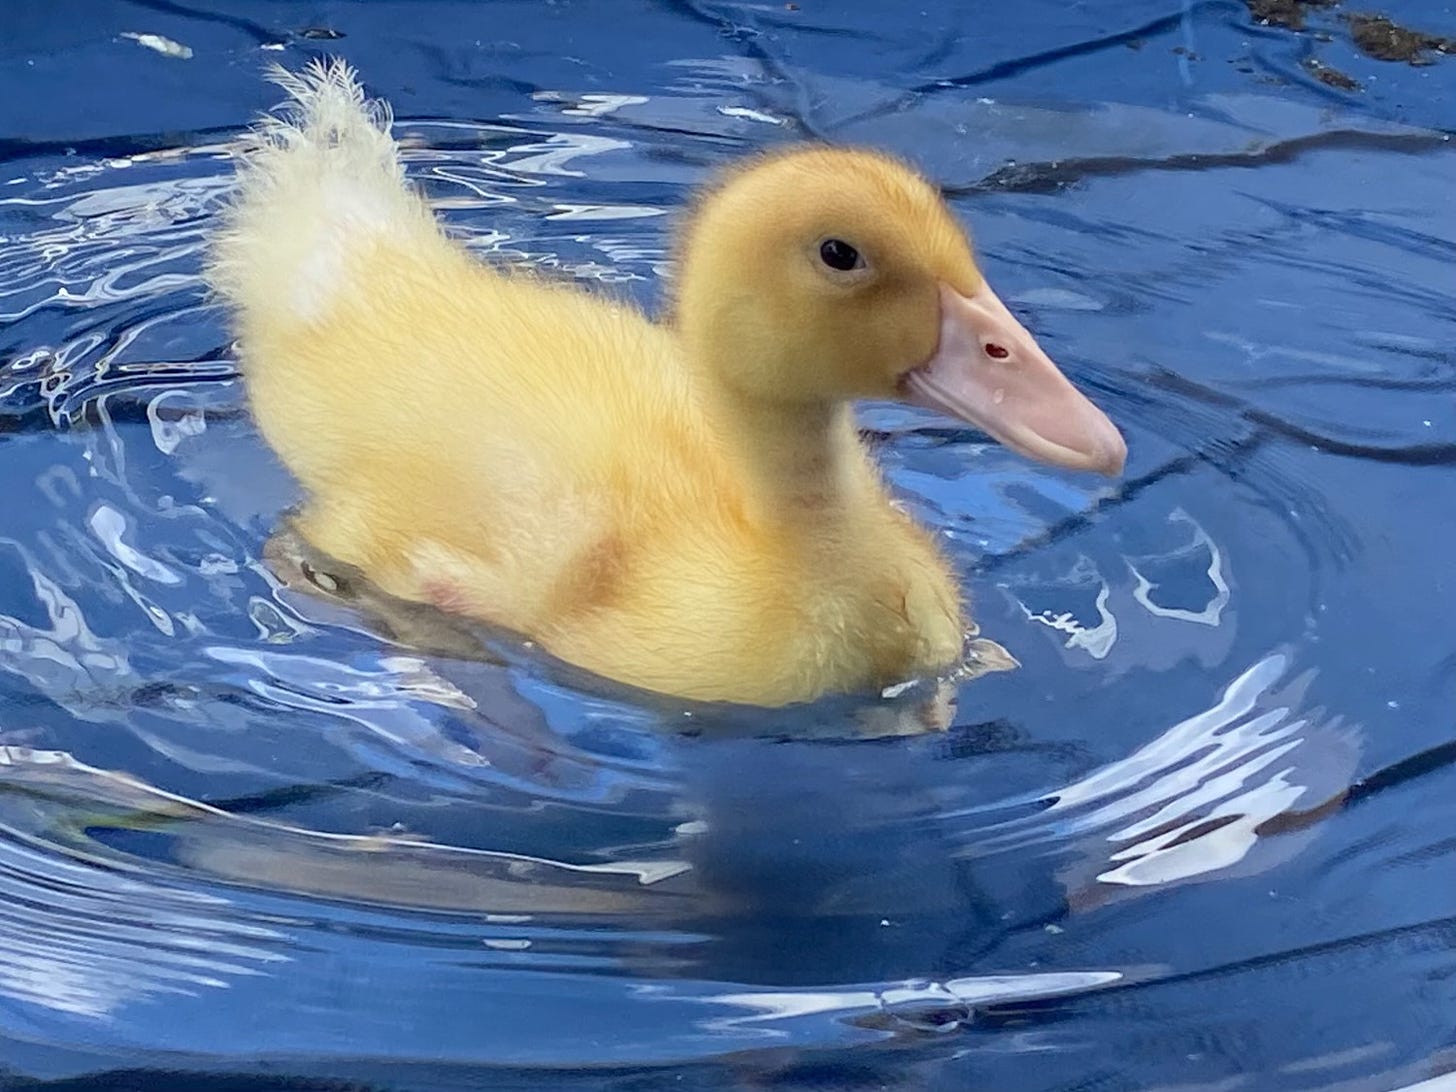 Image of a yellow duckling floating in a blue pool.